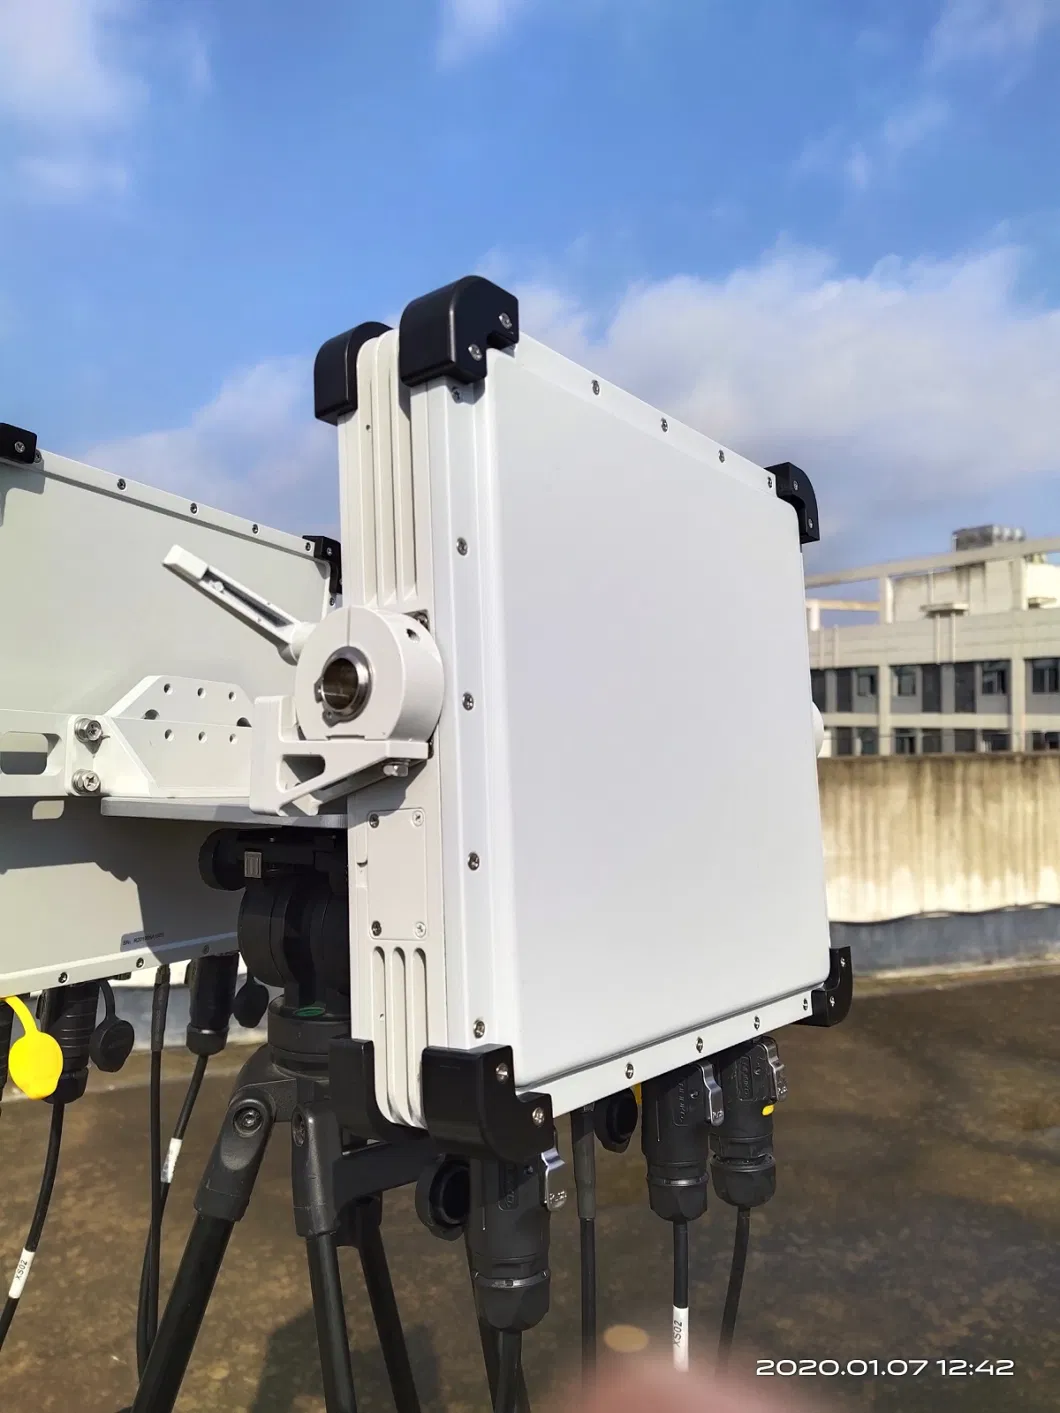 Ground Surveillance with Mmw Radar for Border Control and Camp Protection Applications